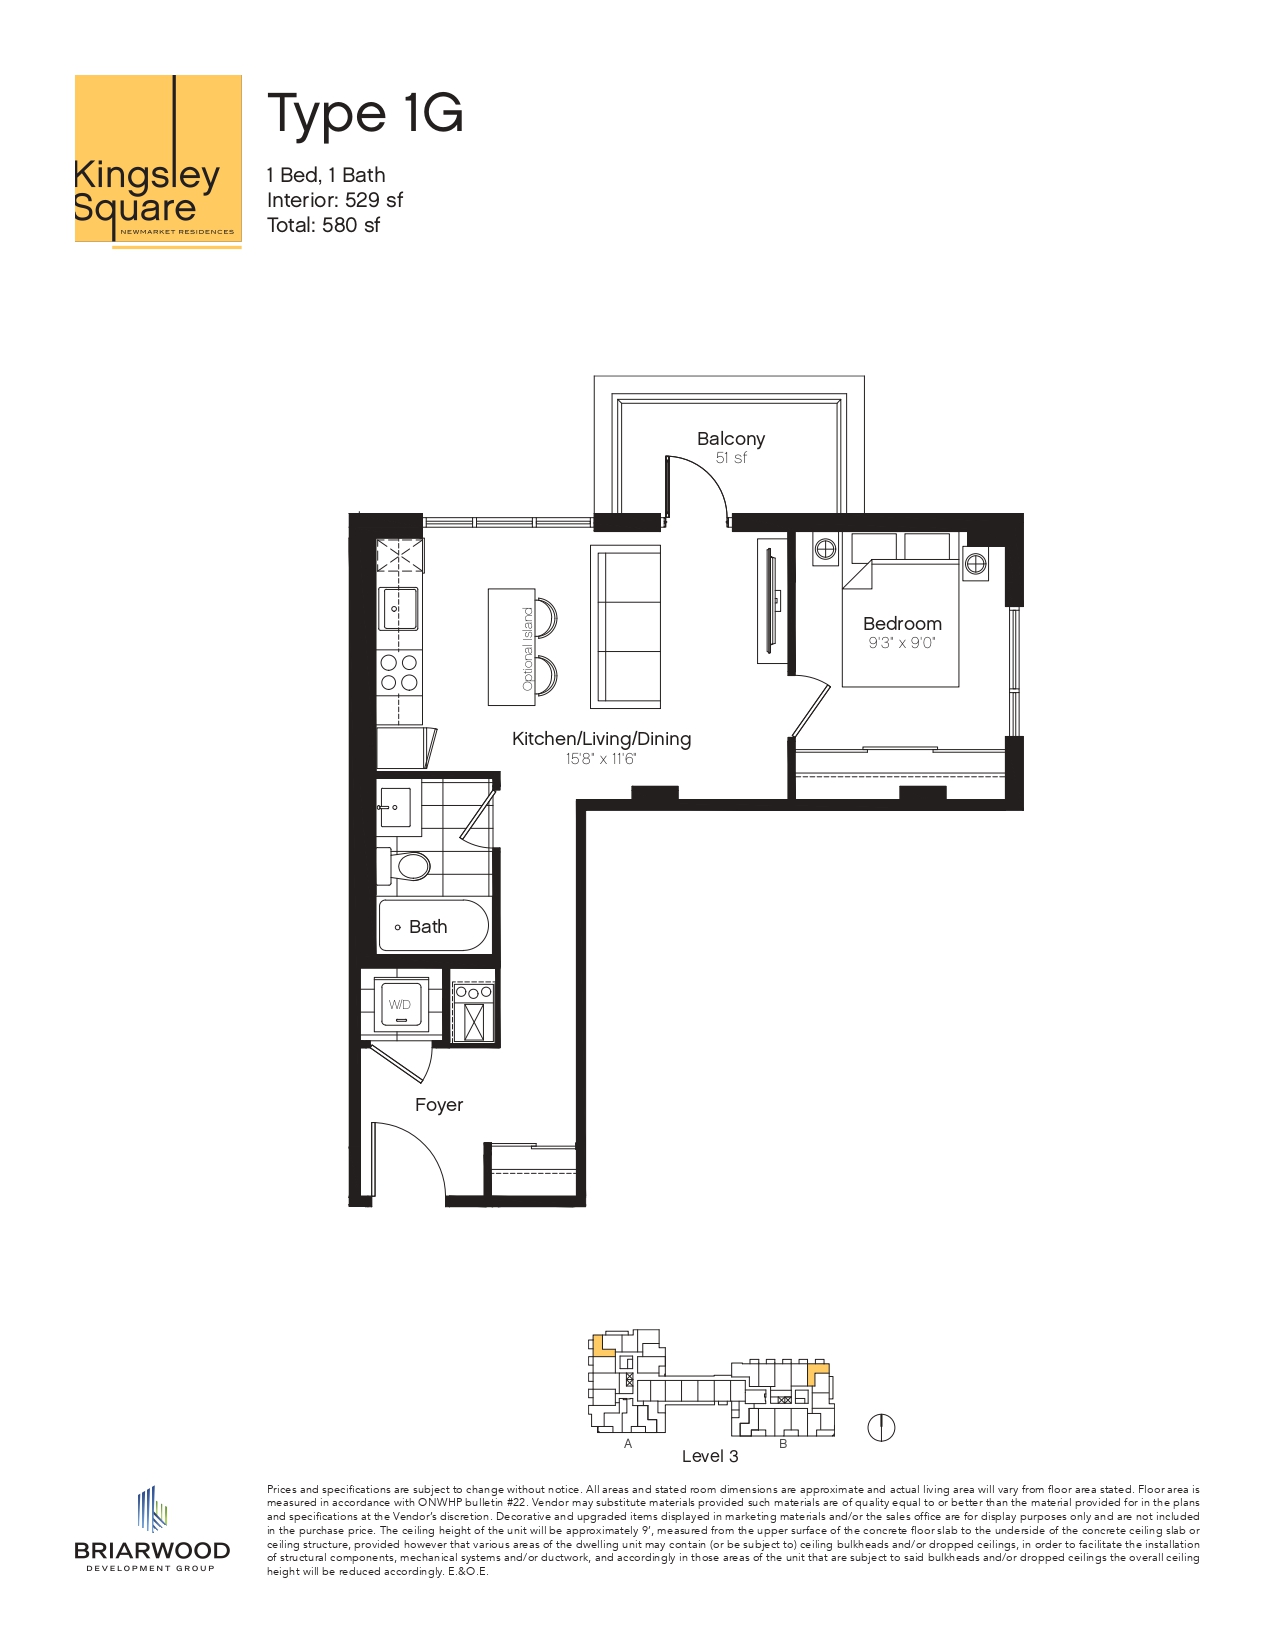 1G Floor Plan of Kingsley Square Condos with undefined beds